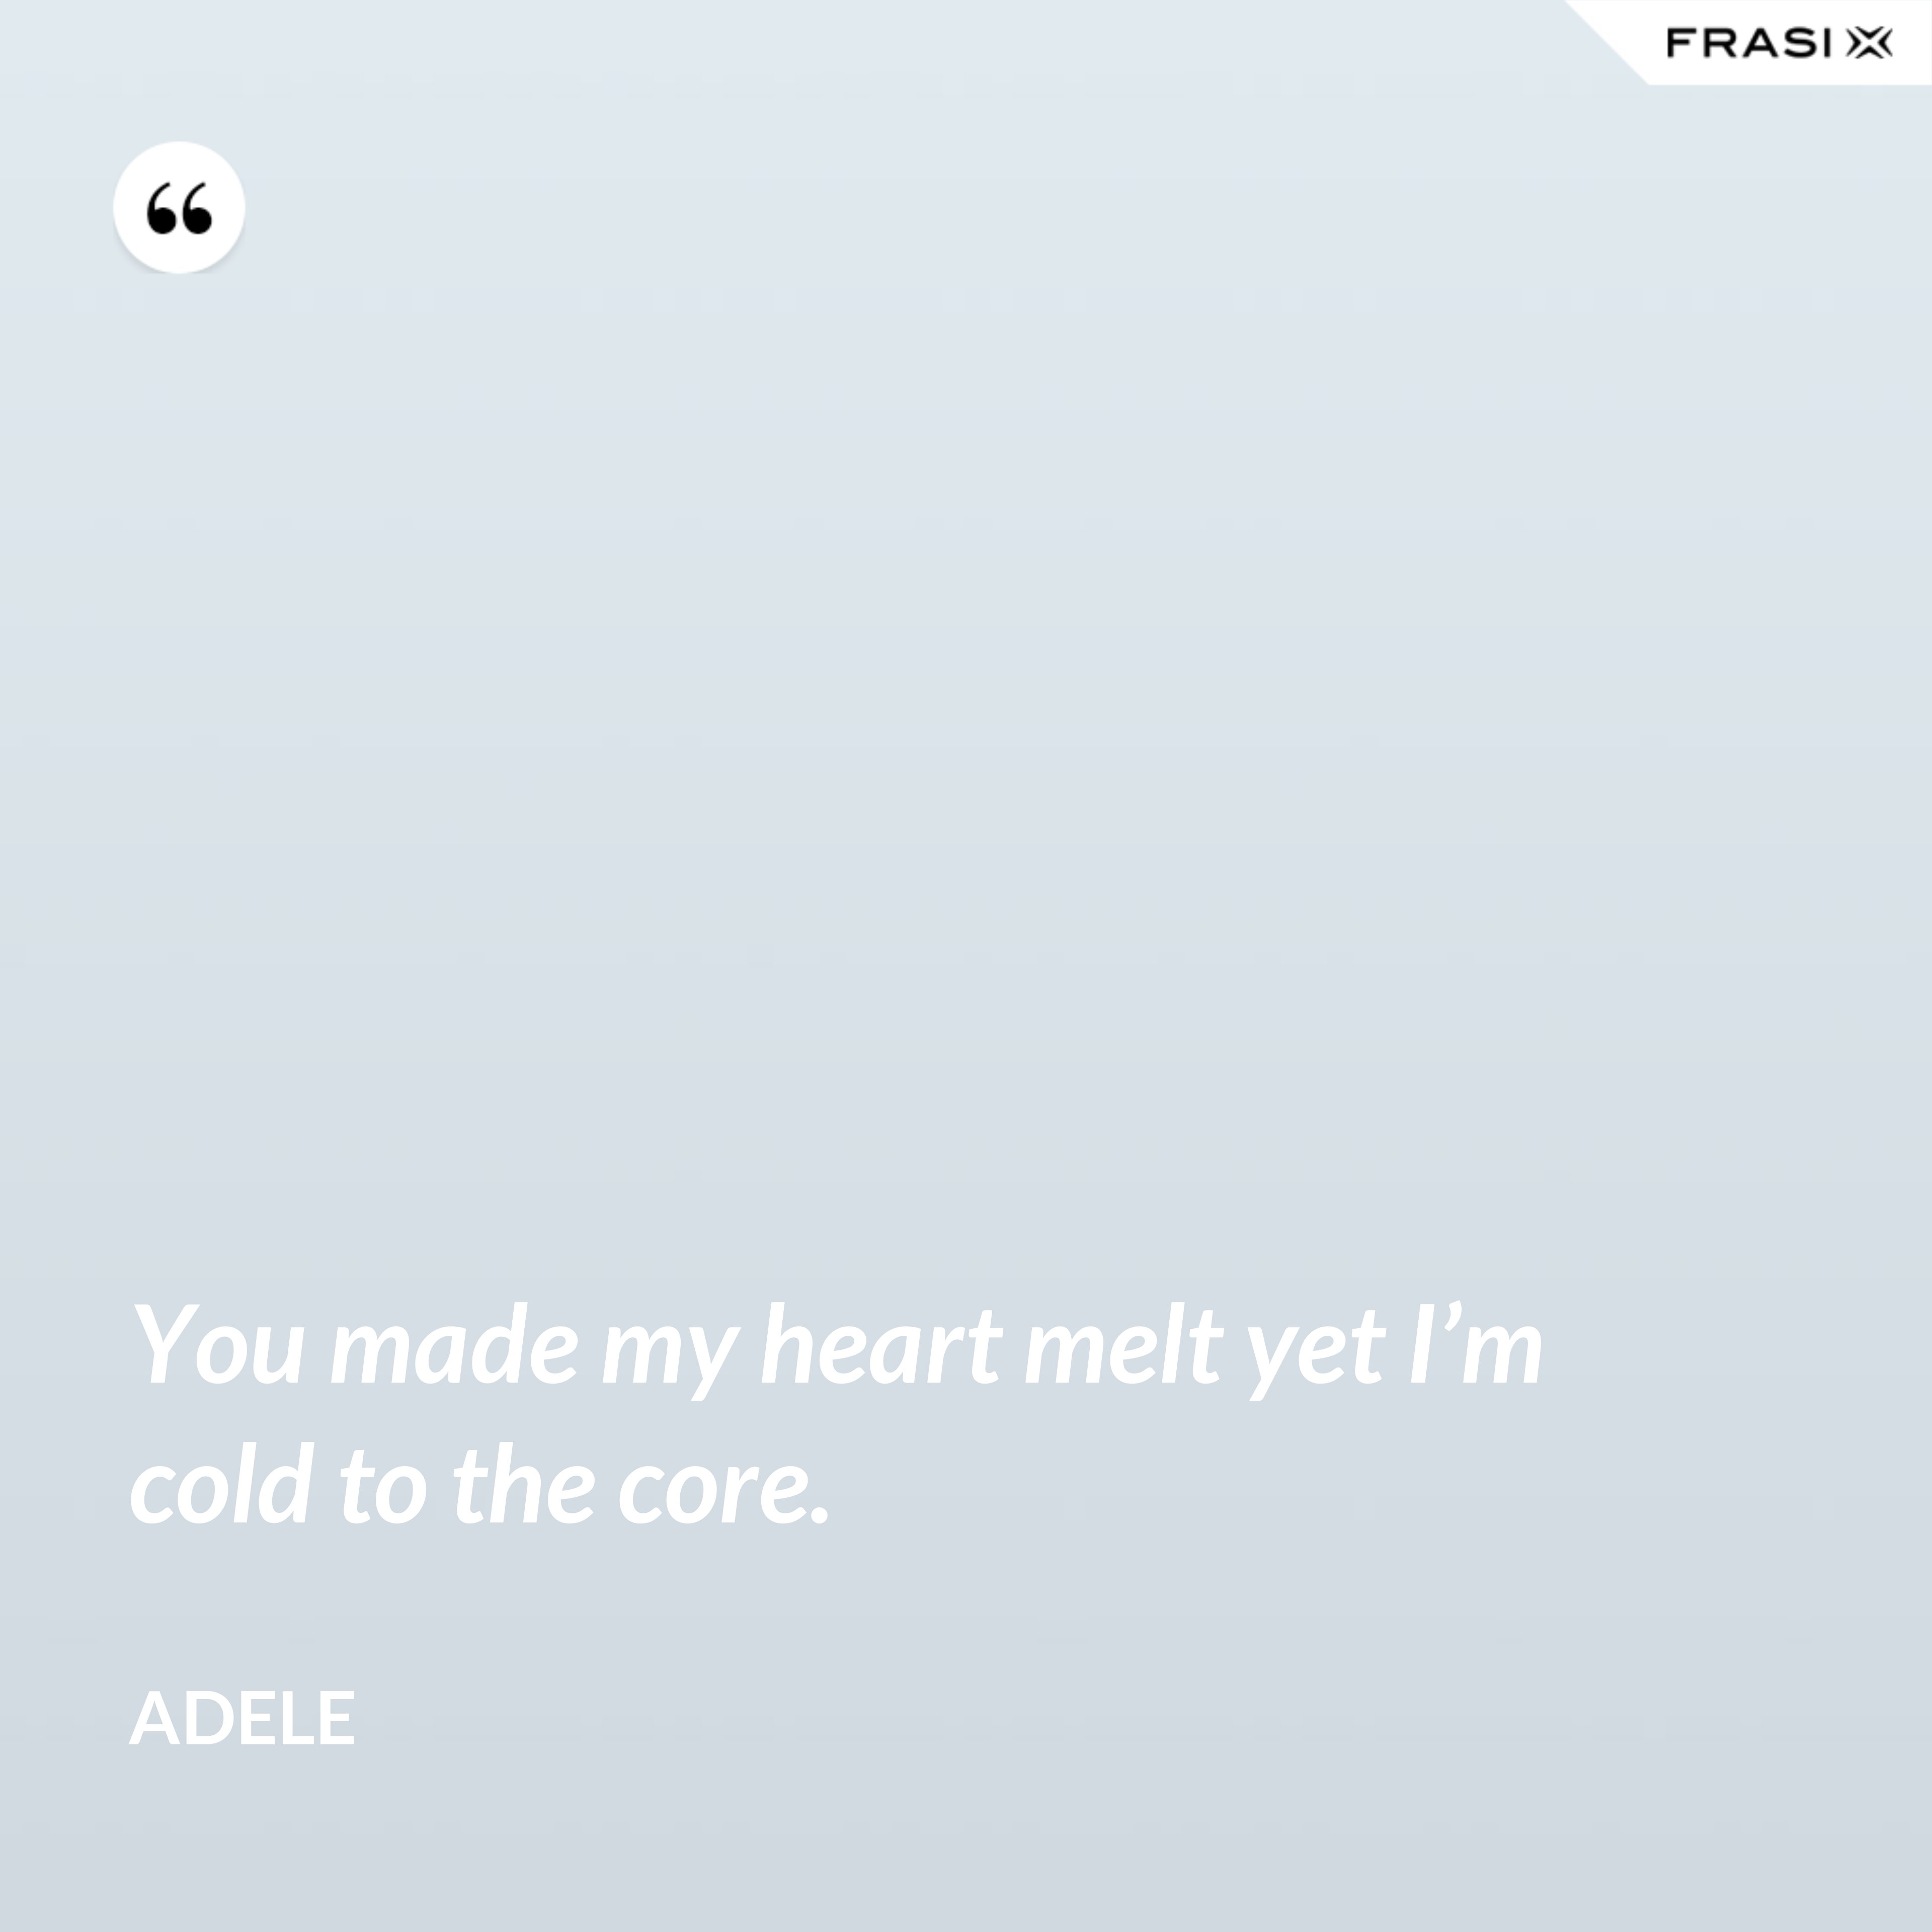 You made my heart melt yet I’m cold to the core. - Adele